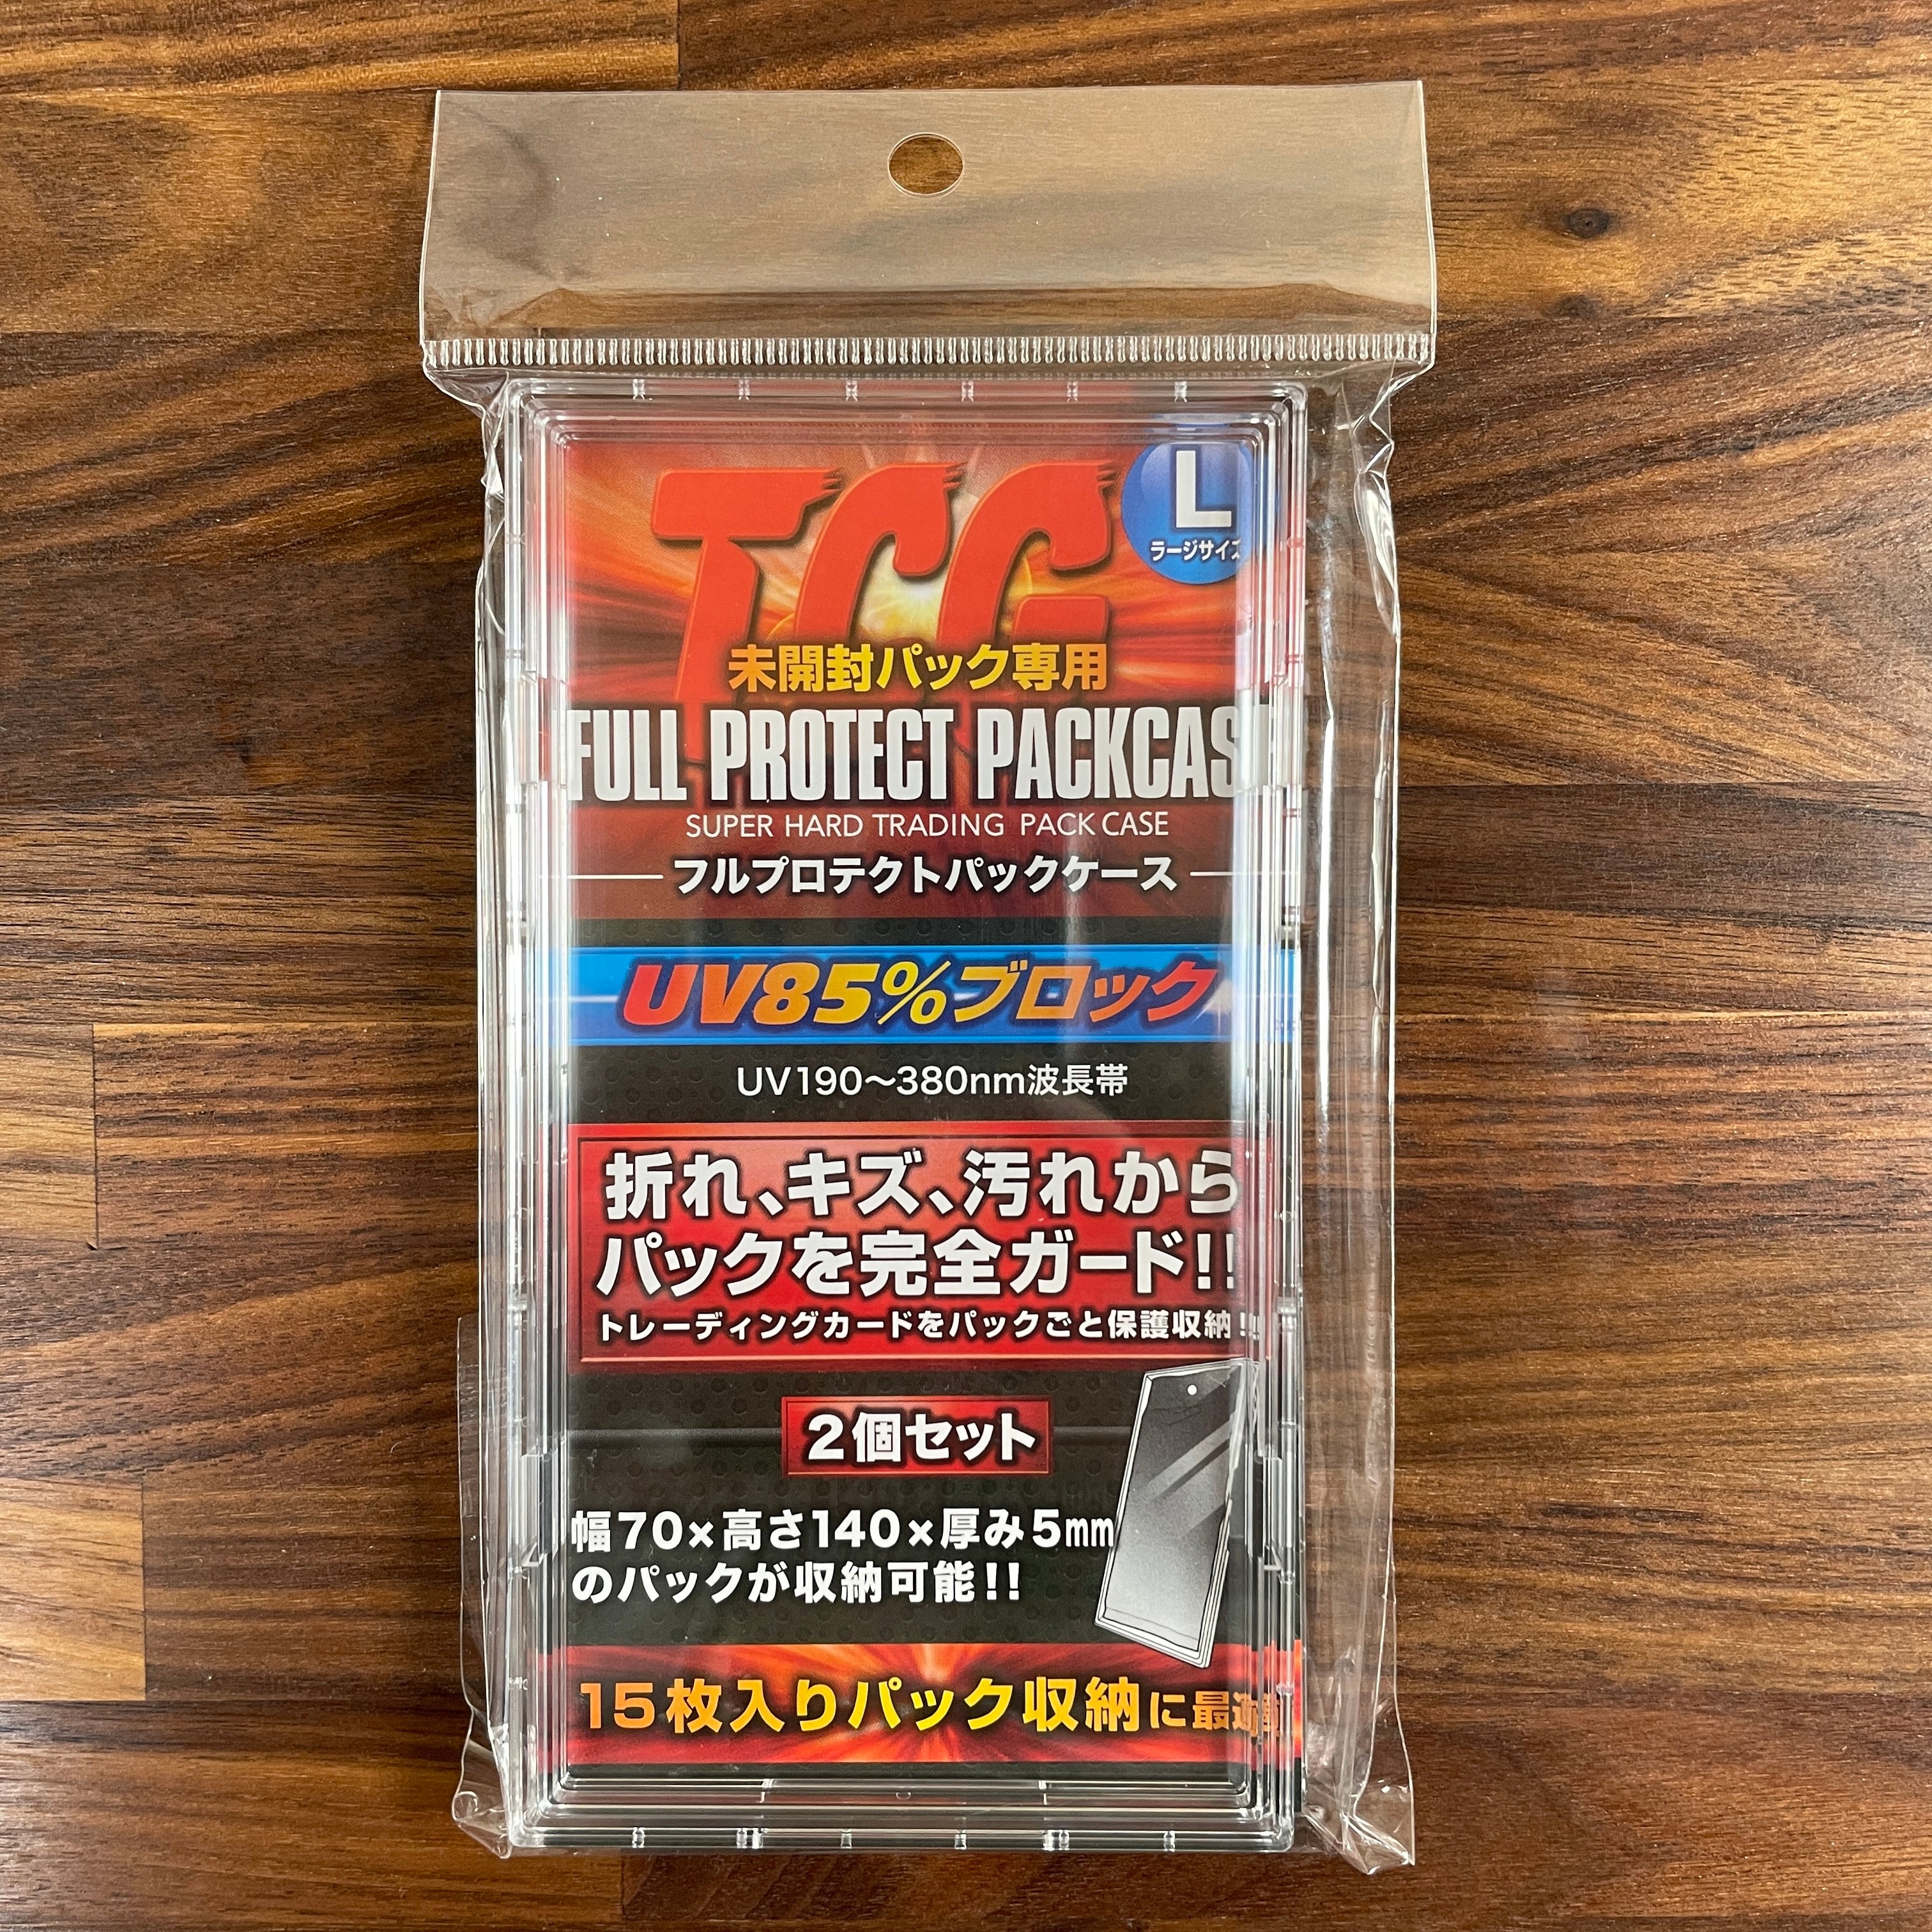 FULL PROTECT PACKCAGE SUPER HARD TRADING PACK CASE Large size (set of 2)